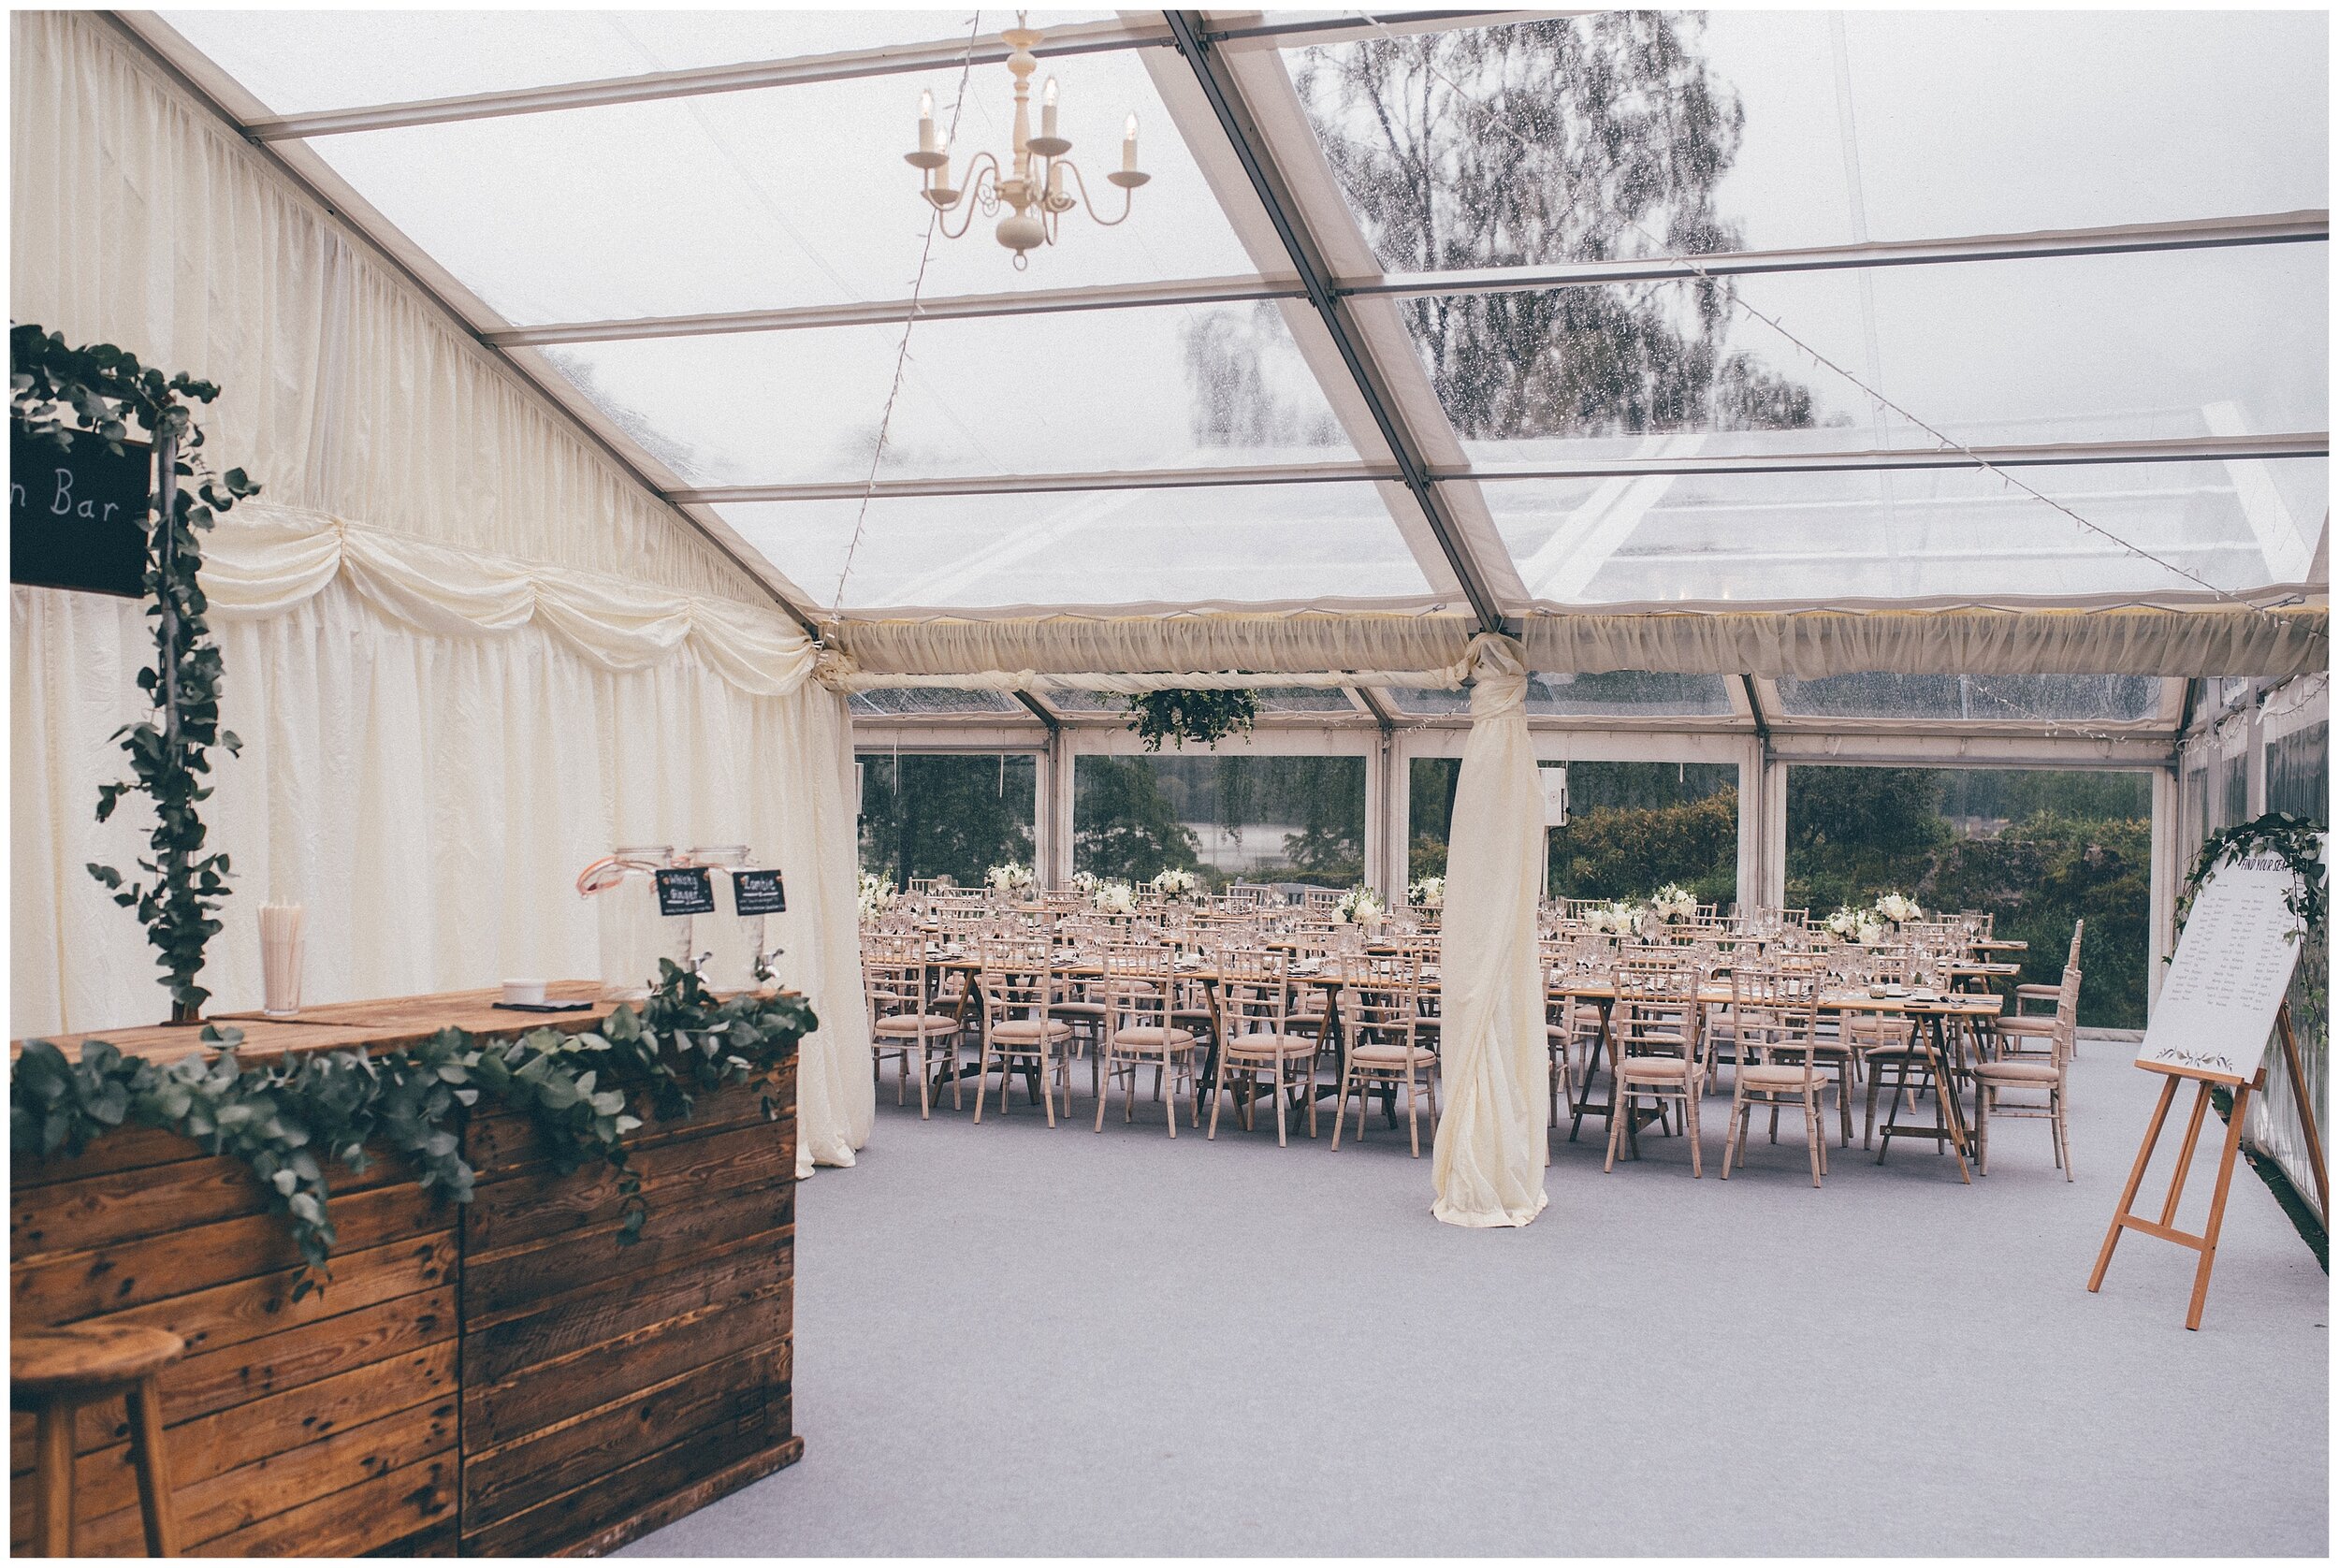 Wedding details in the marquee at Silverholme Manor at Graythwaite Estate in the Lake District.